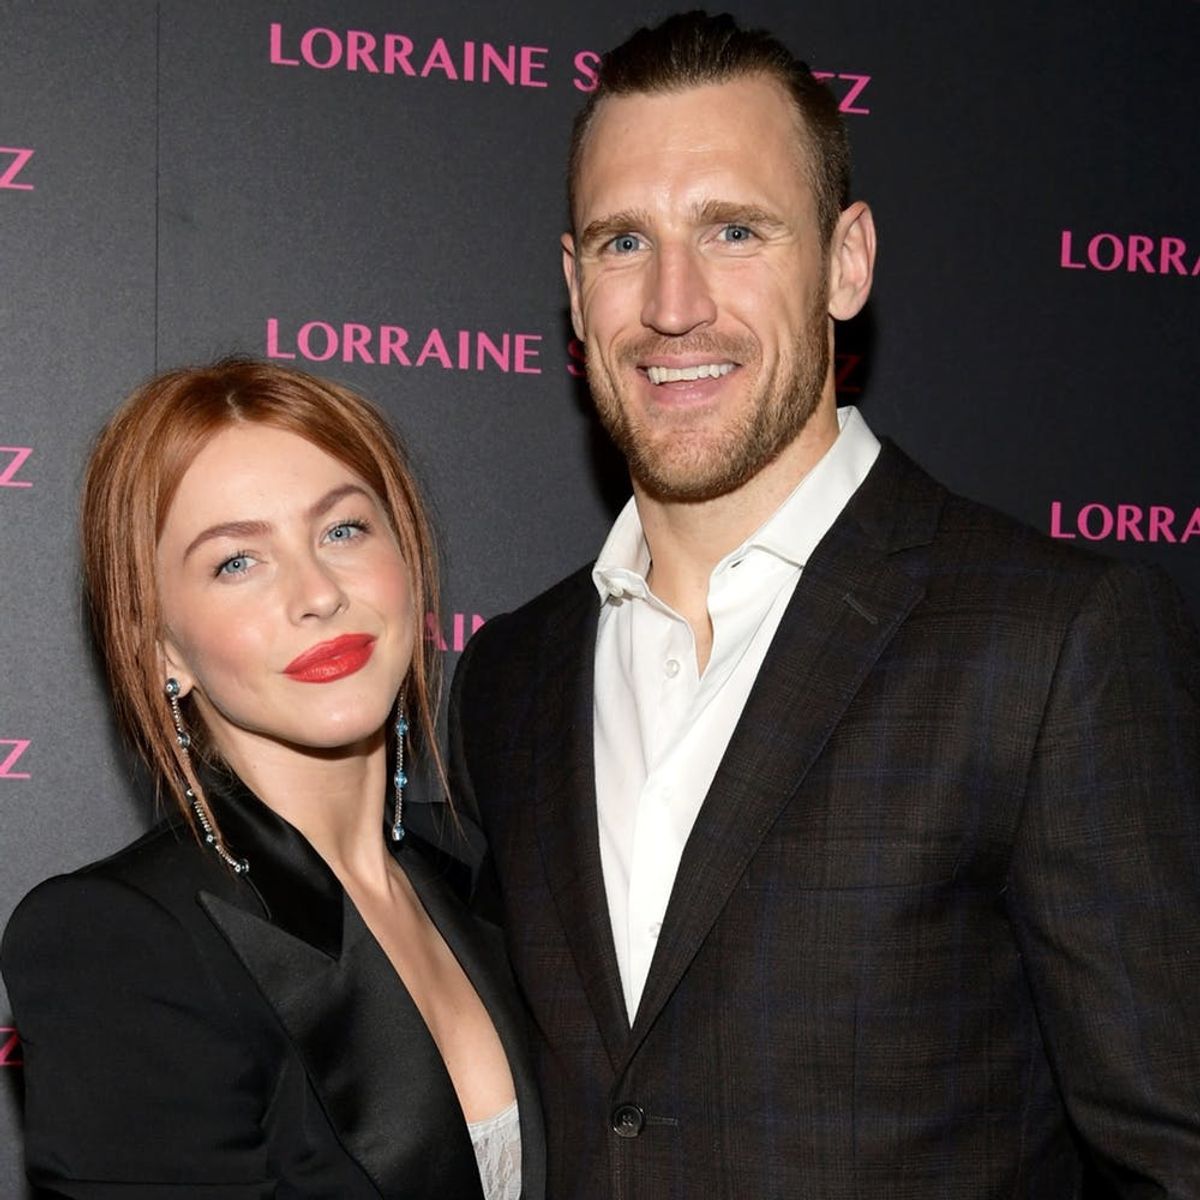 Julianne Hough and Brooks Laich Reveal the Best and Most Challenging Parts of Marriage